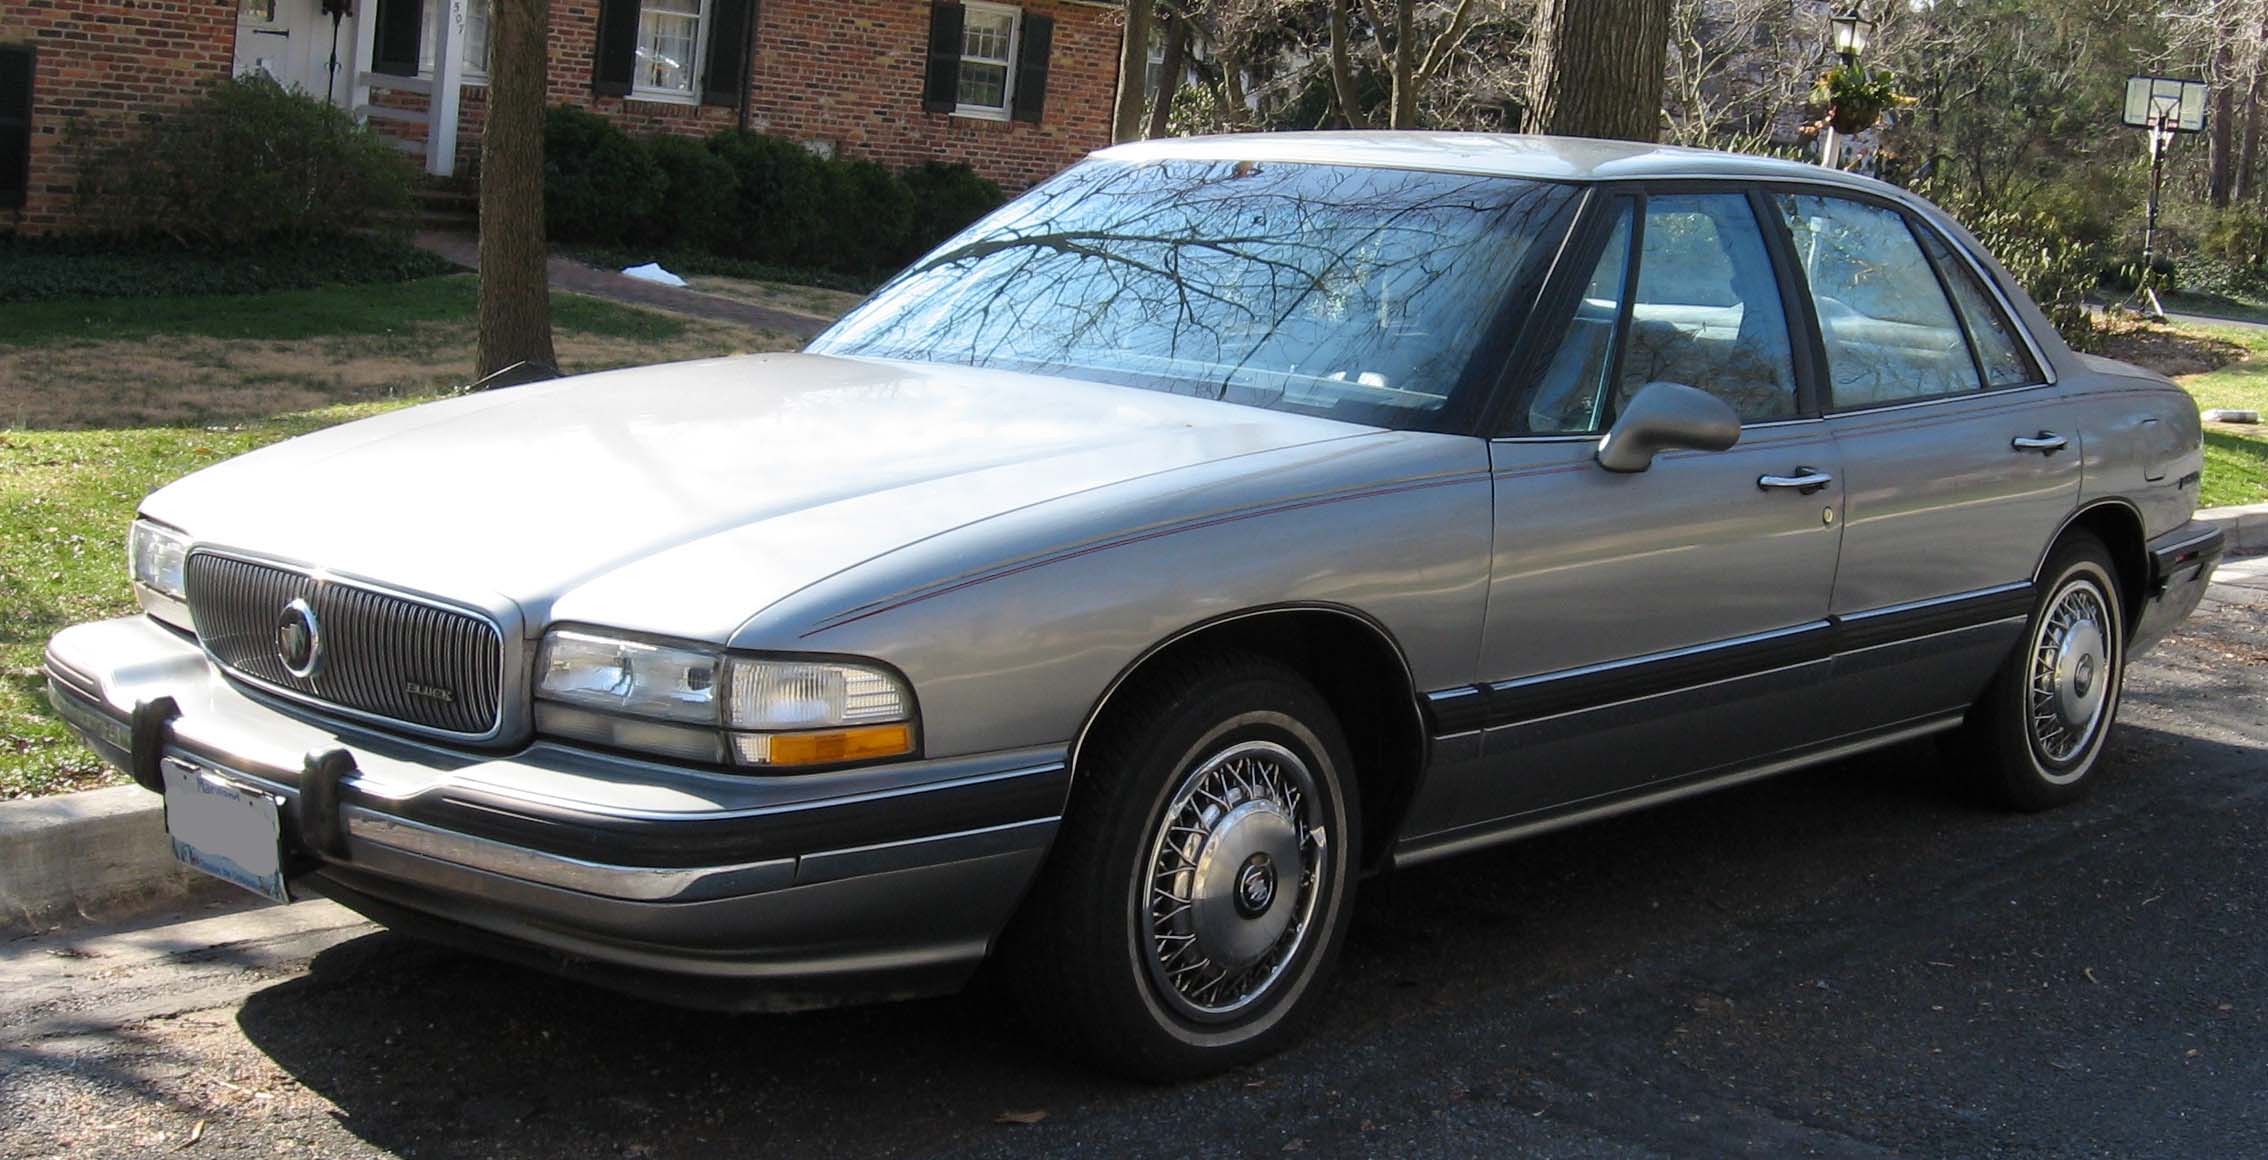 Amazing Buick LeSabre Pictures & Backgrounds